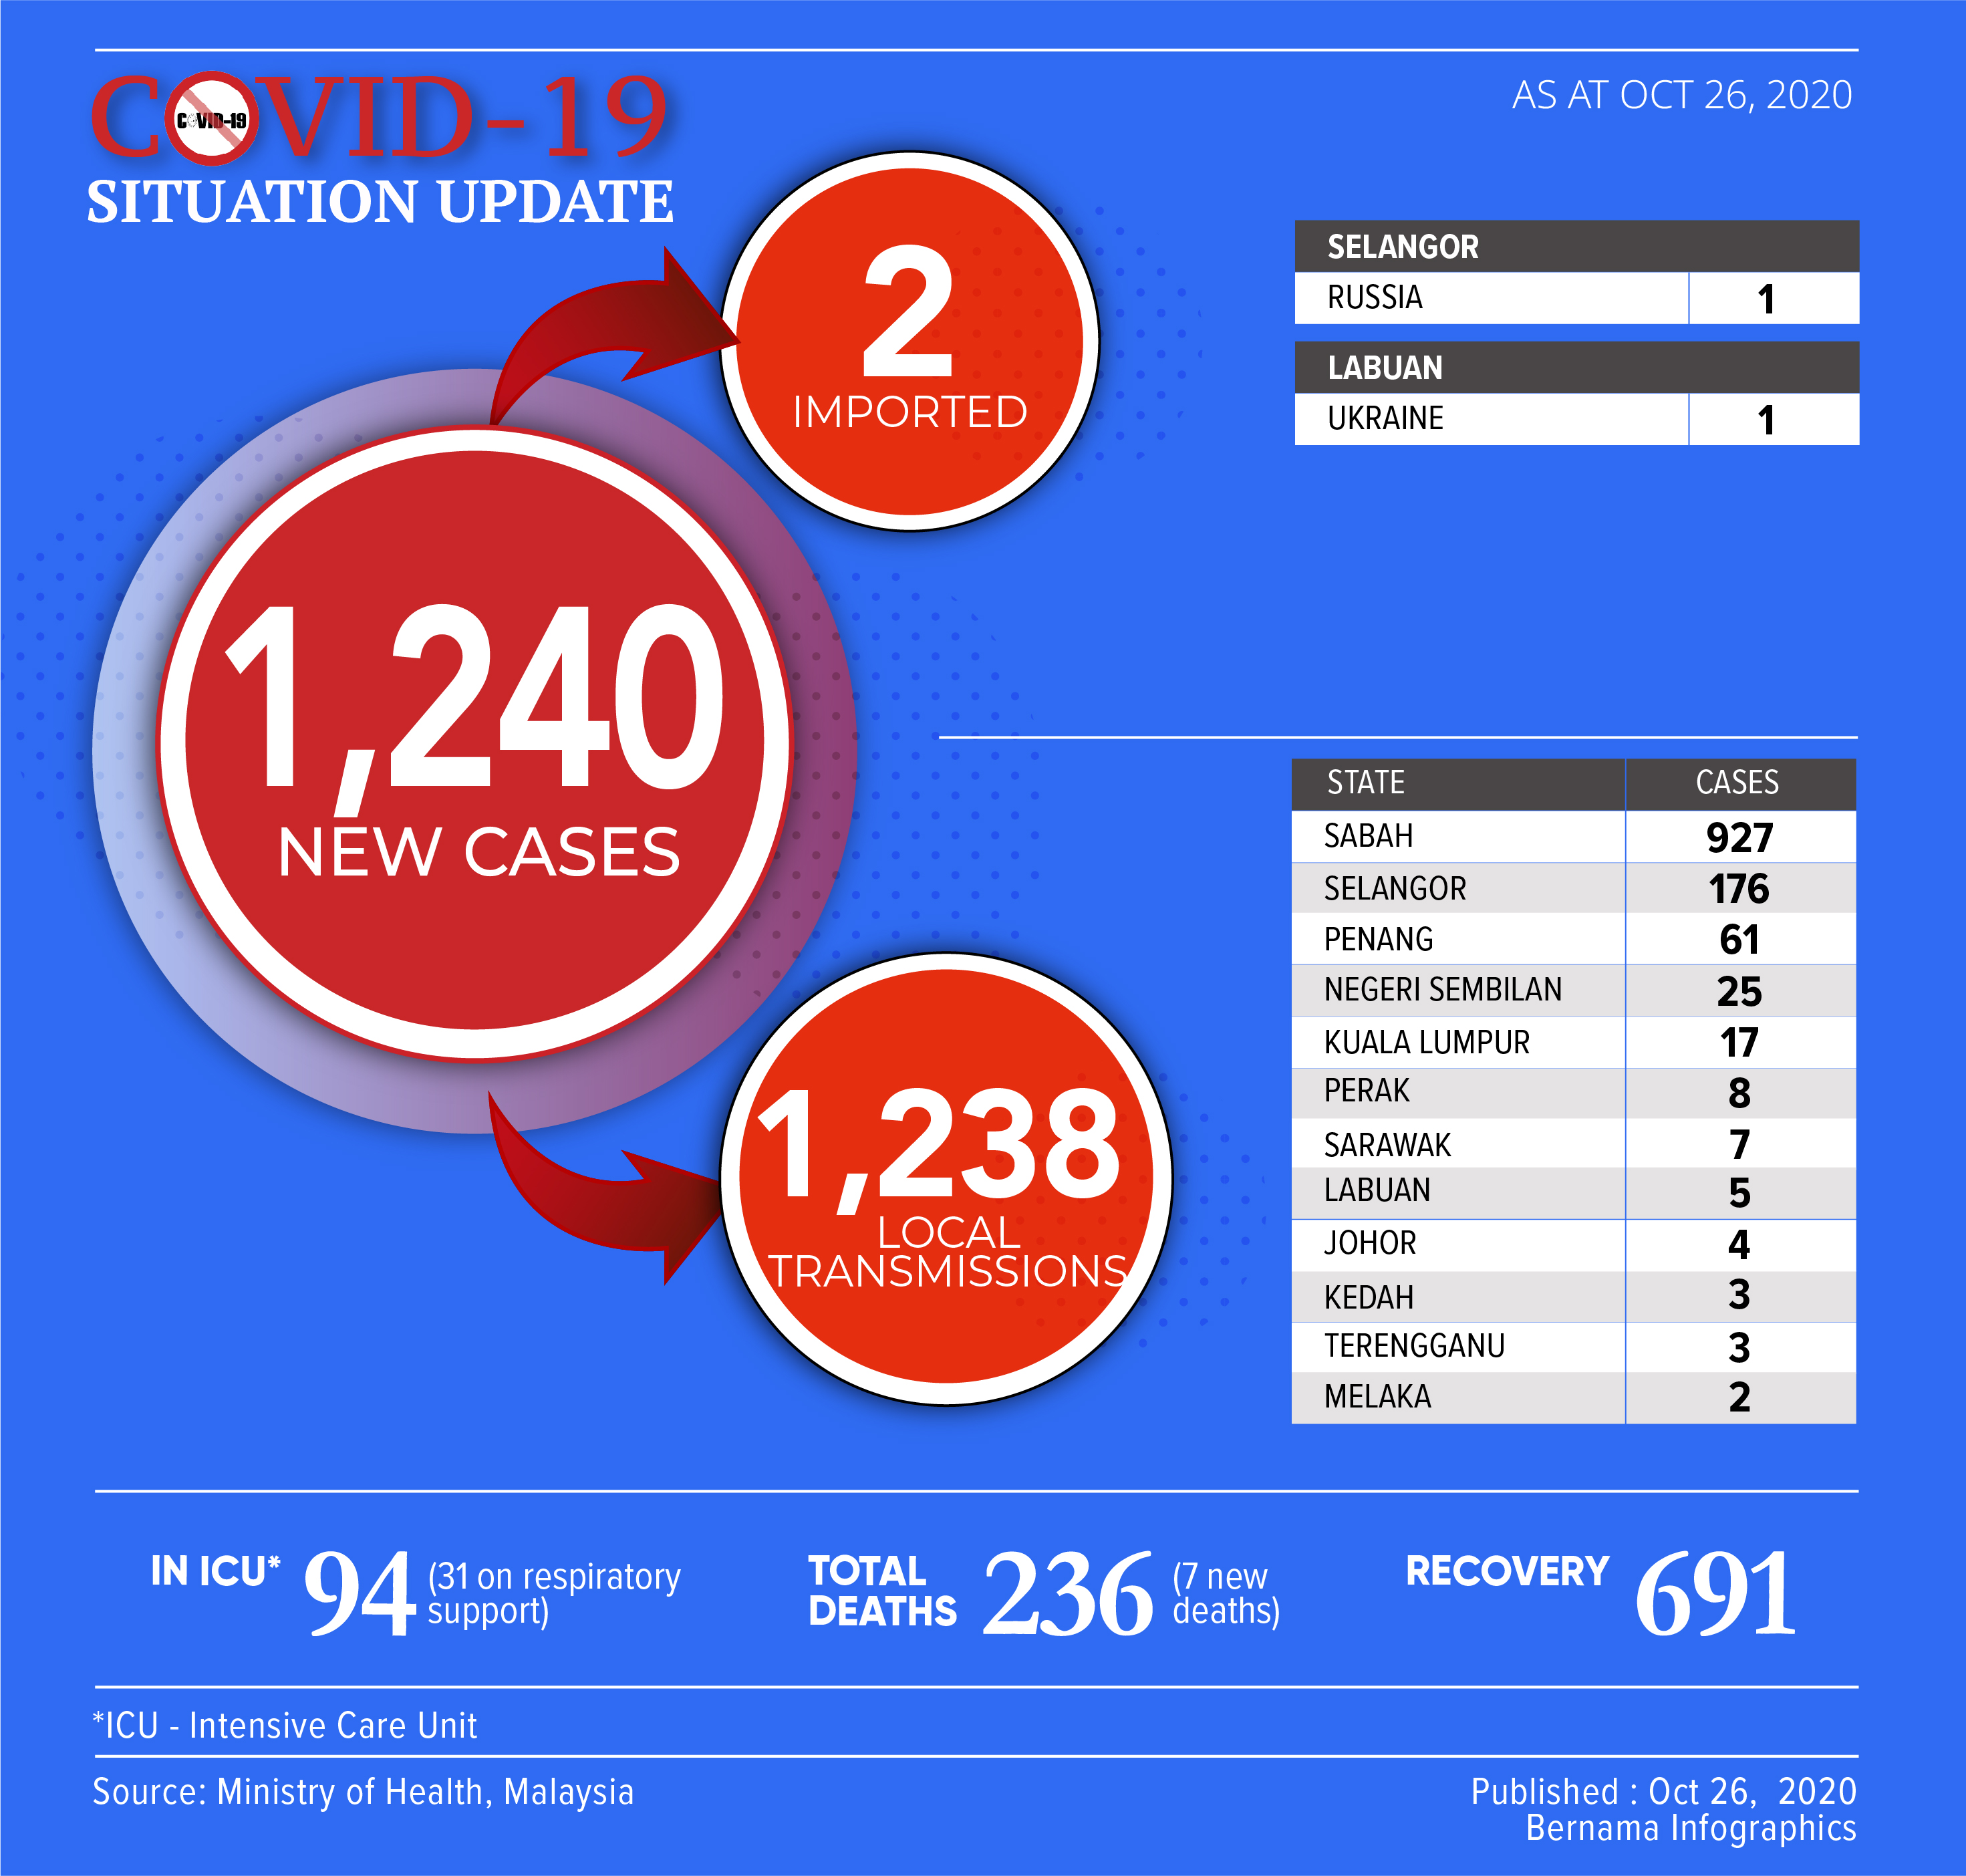 Malaysia hits highest daily tally of 1,240 new COVID-19 cases